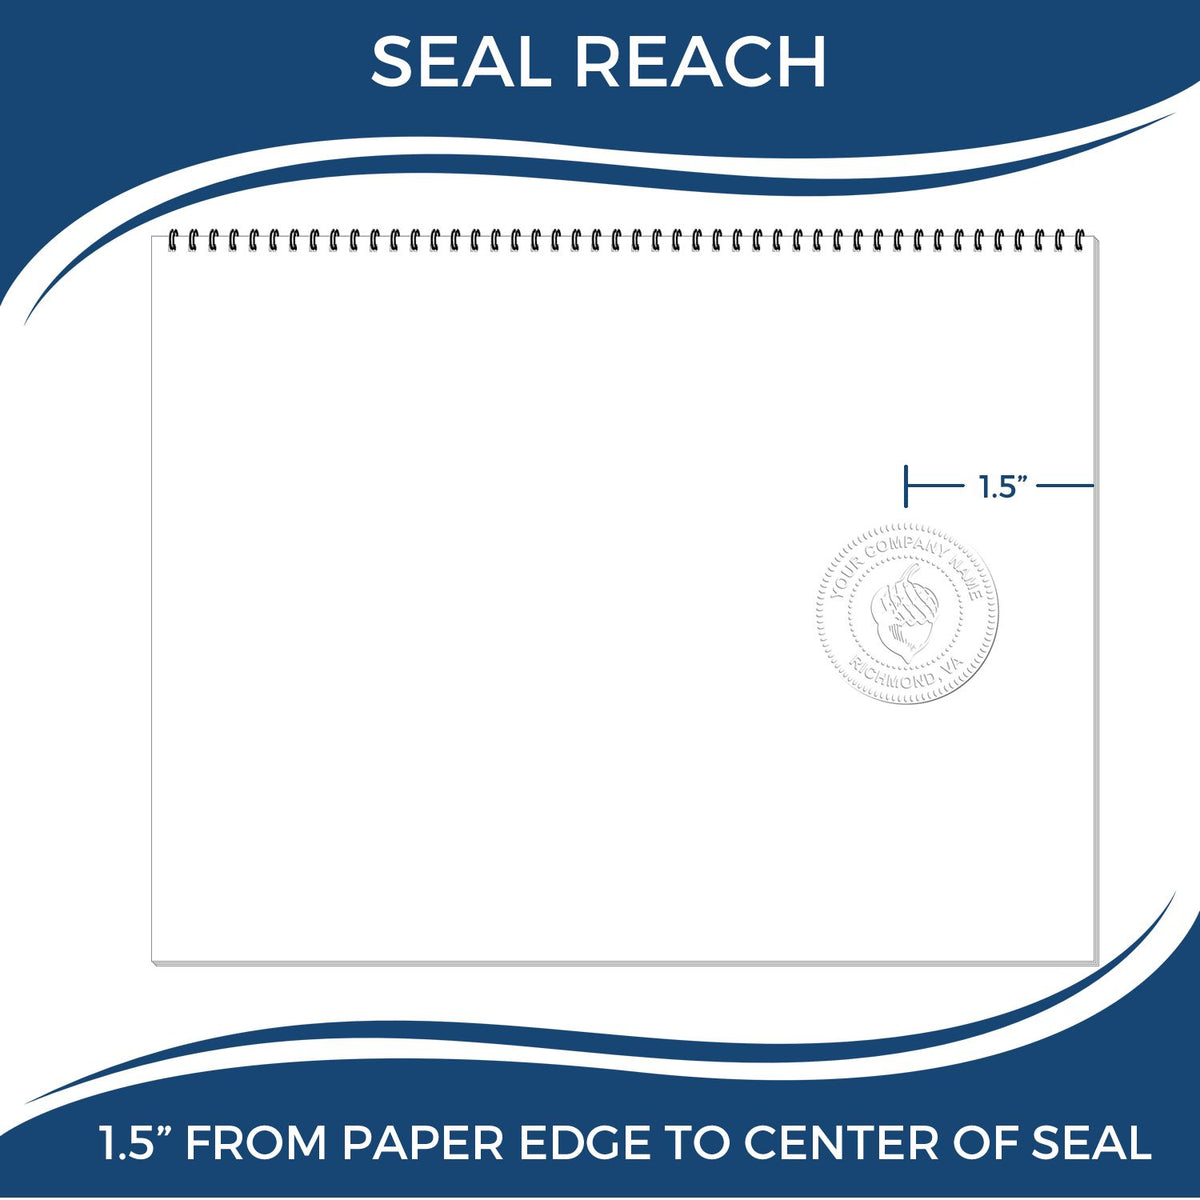 An infographic showing the seal reach which is represented by a ruler and a miniature seal image of the Hybrid Pennsylvania Landscape Architect Seal